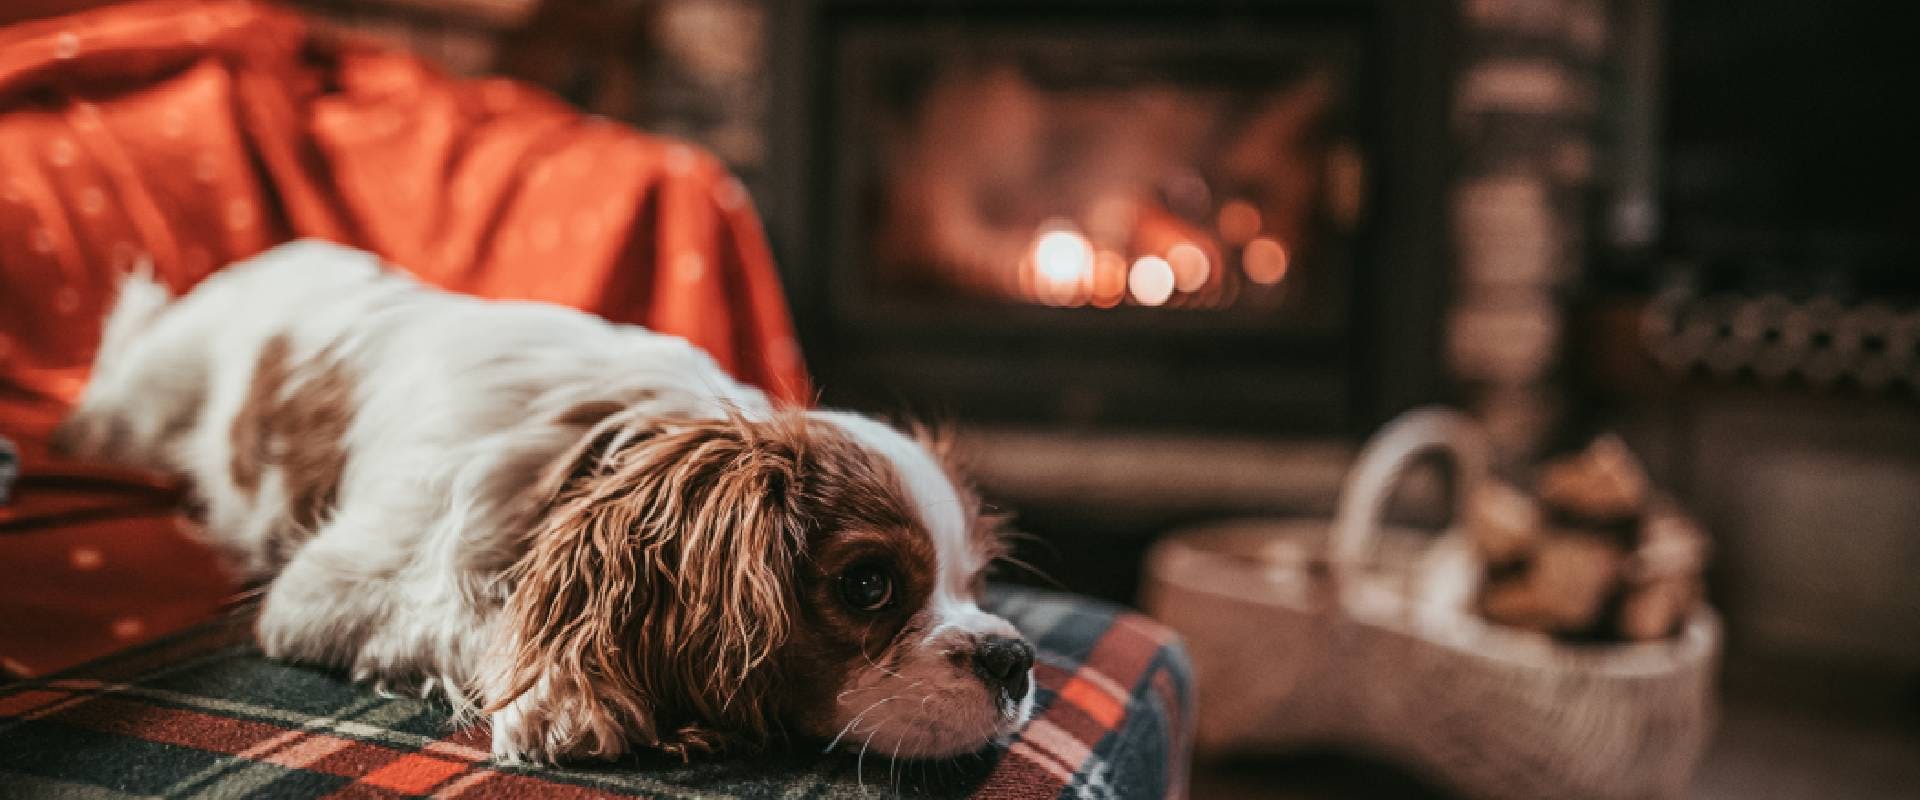 Cavalier King Charles Spaniel laying on the sofa in front of a fire